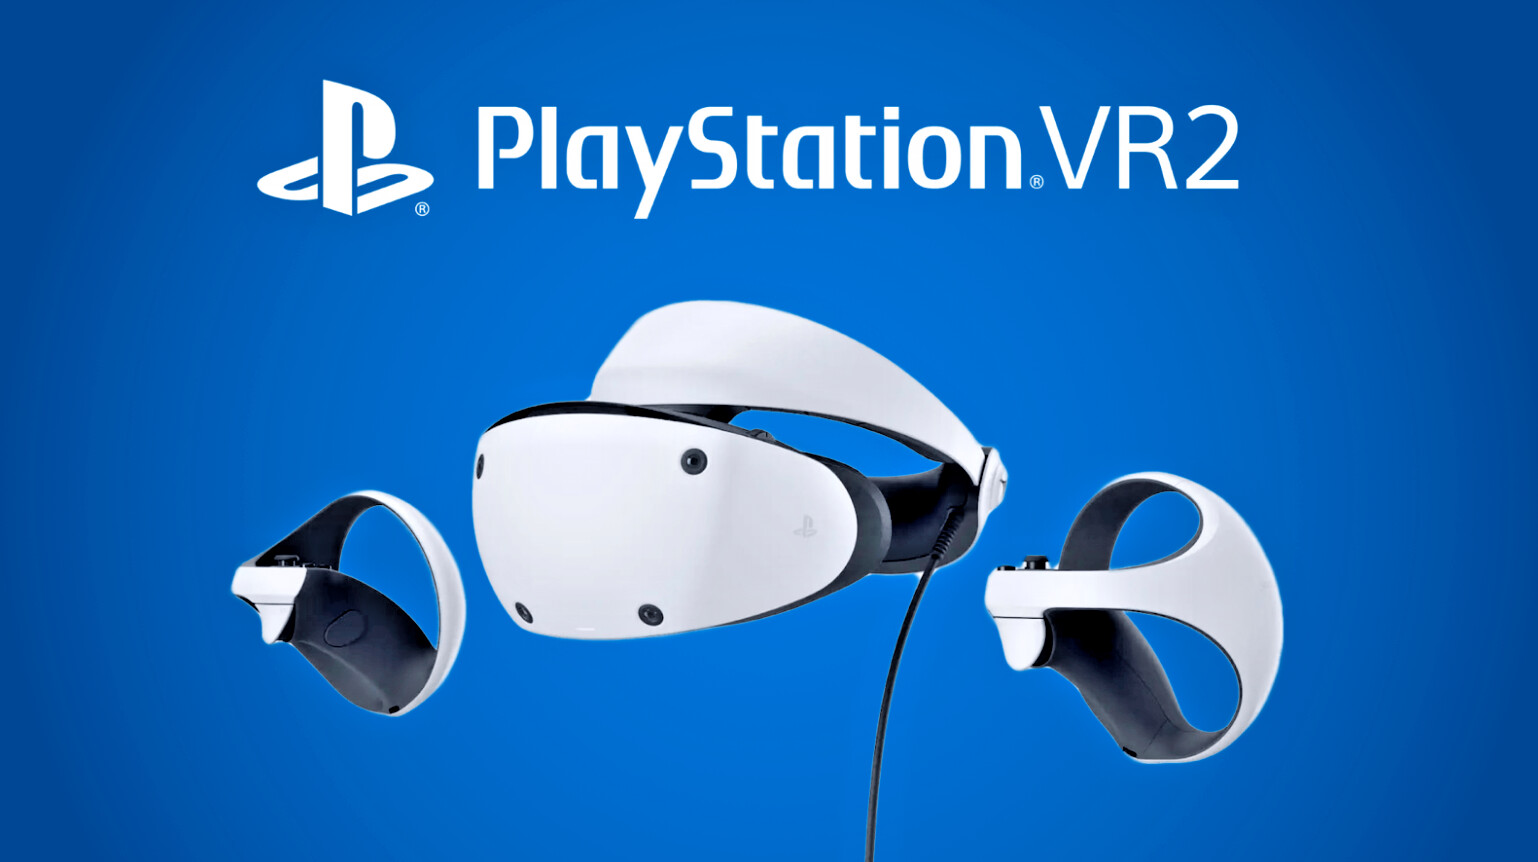 Sony could make Playstation VR2 PC-compatible - Overclocking.com